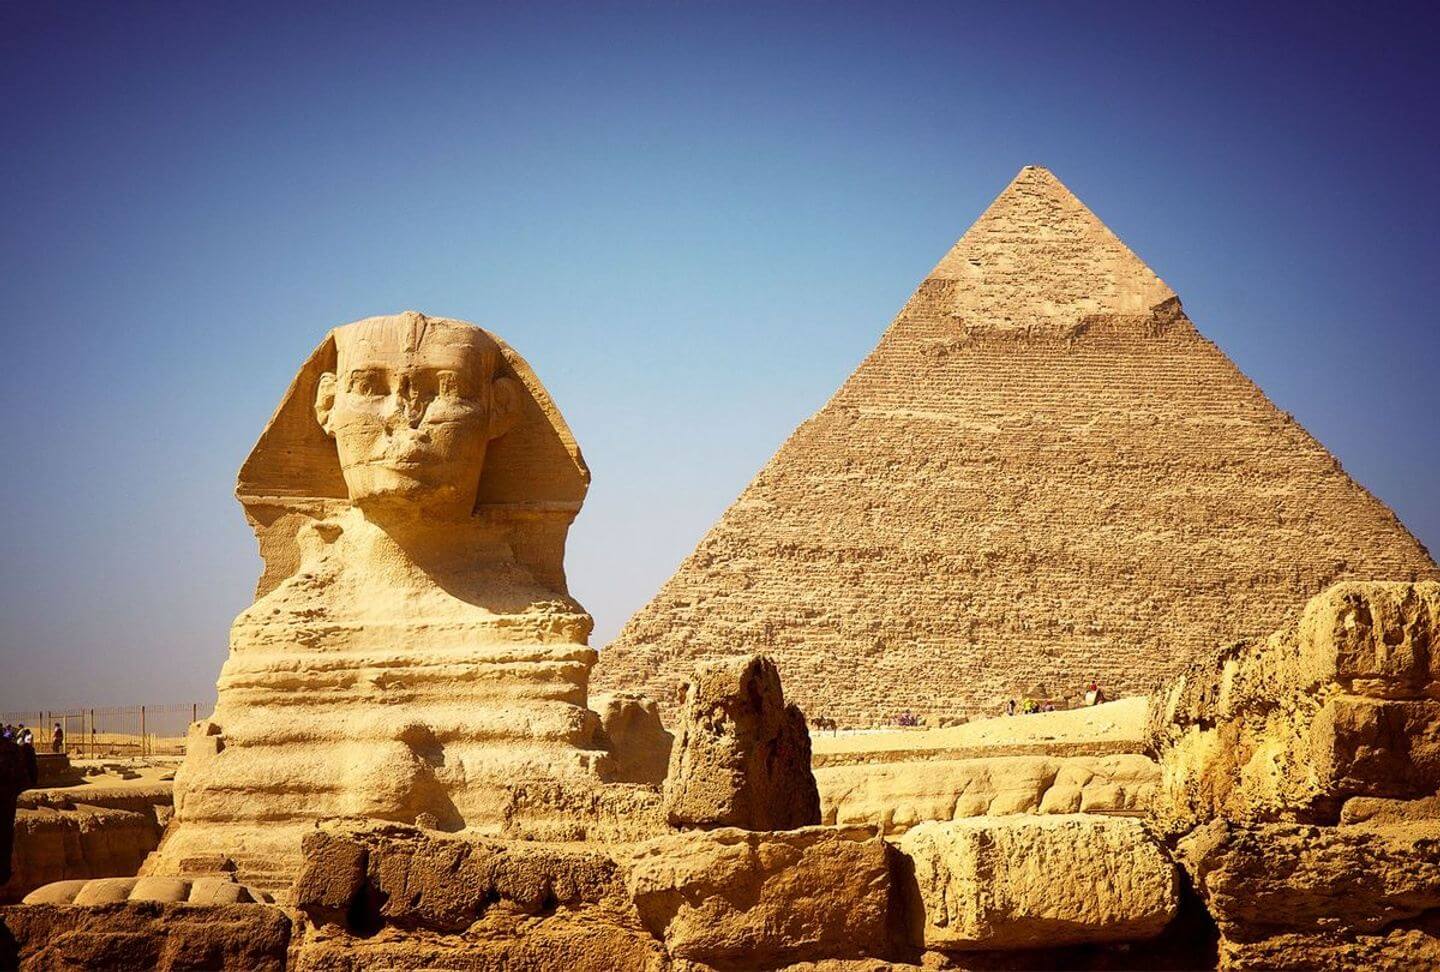 A Picture of the Great Sphinx and Pyramids of Egypt